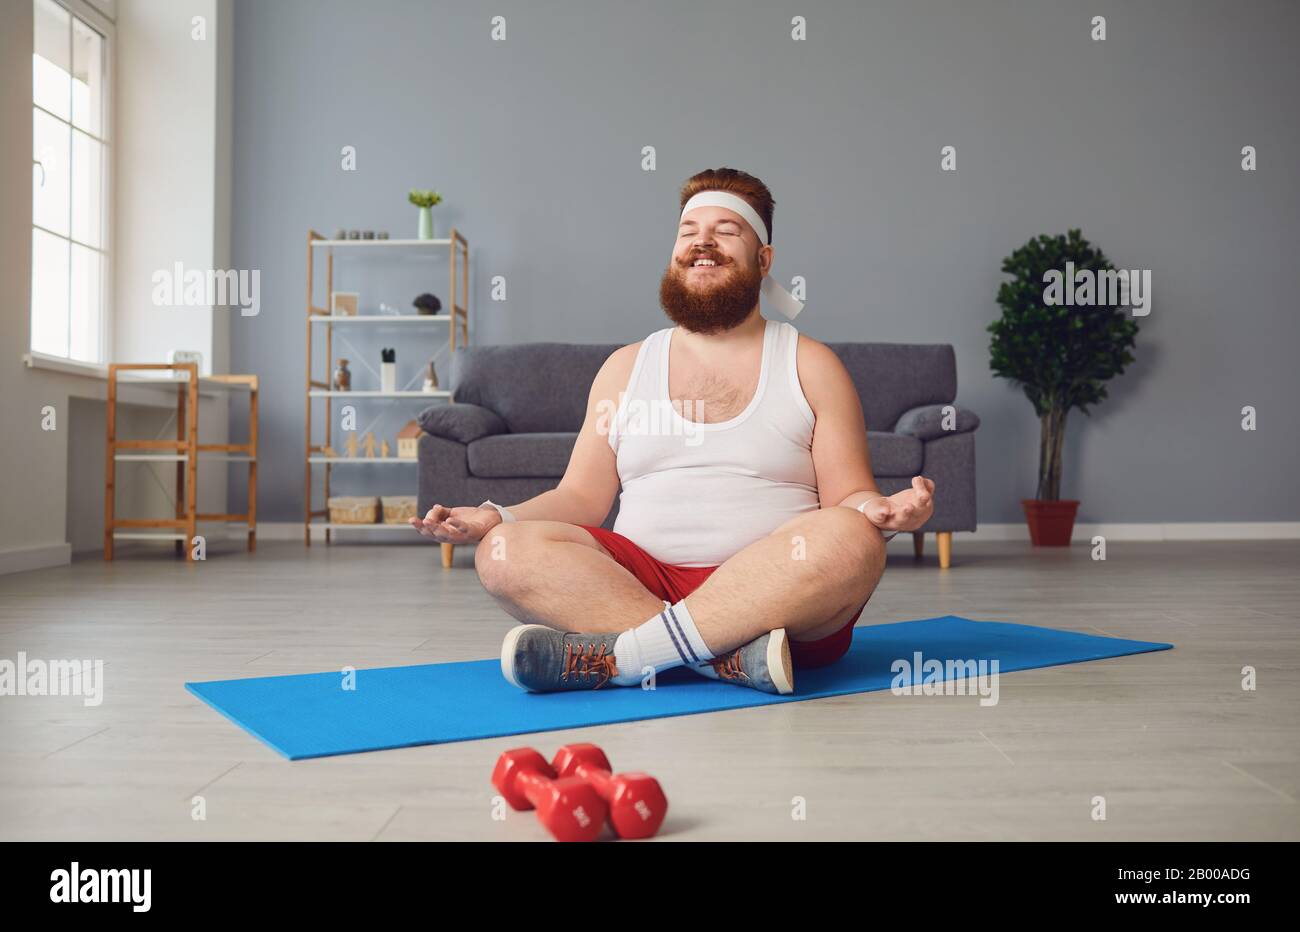 Funny yoga. Fat man doing yoga exercises in the room Stock Photo - Alamy